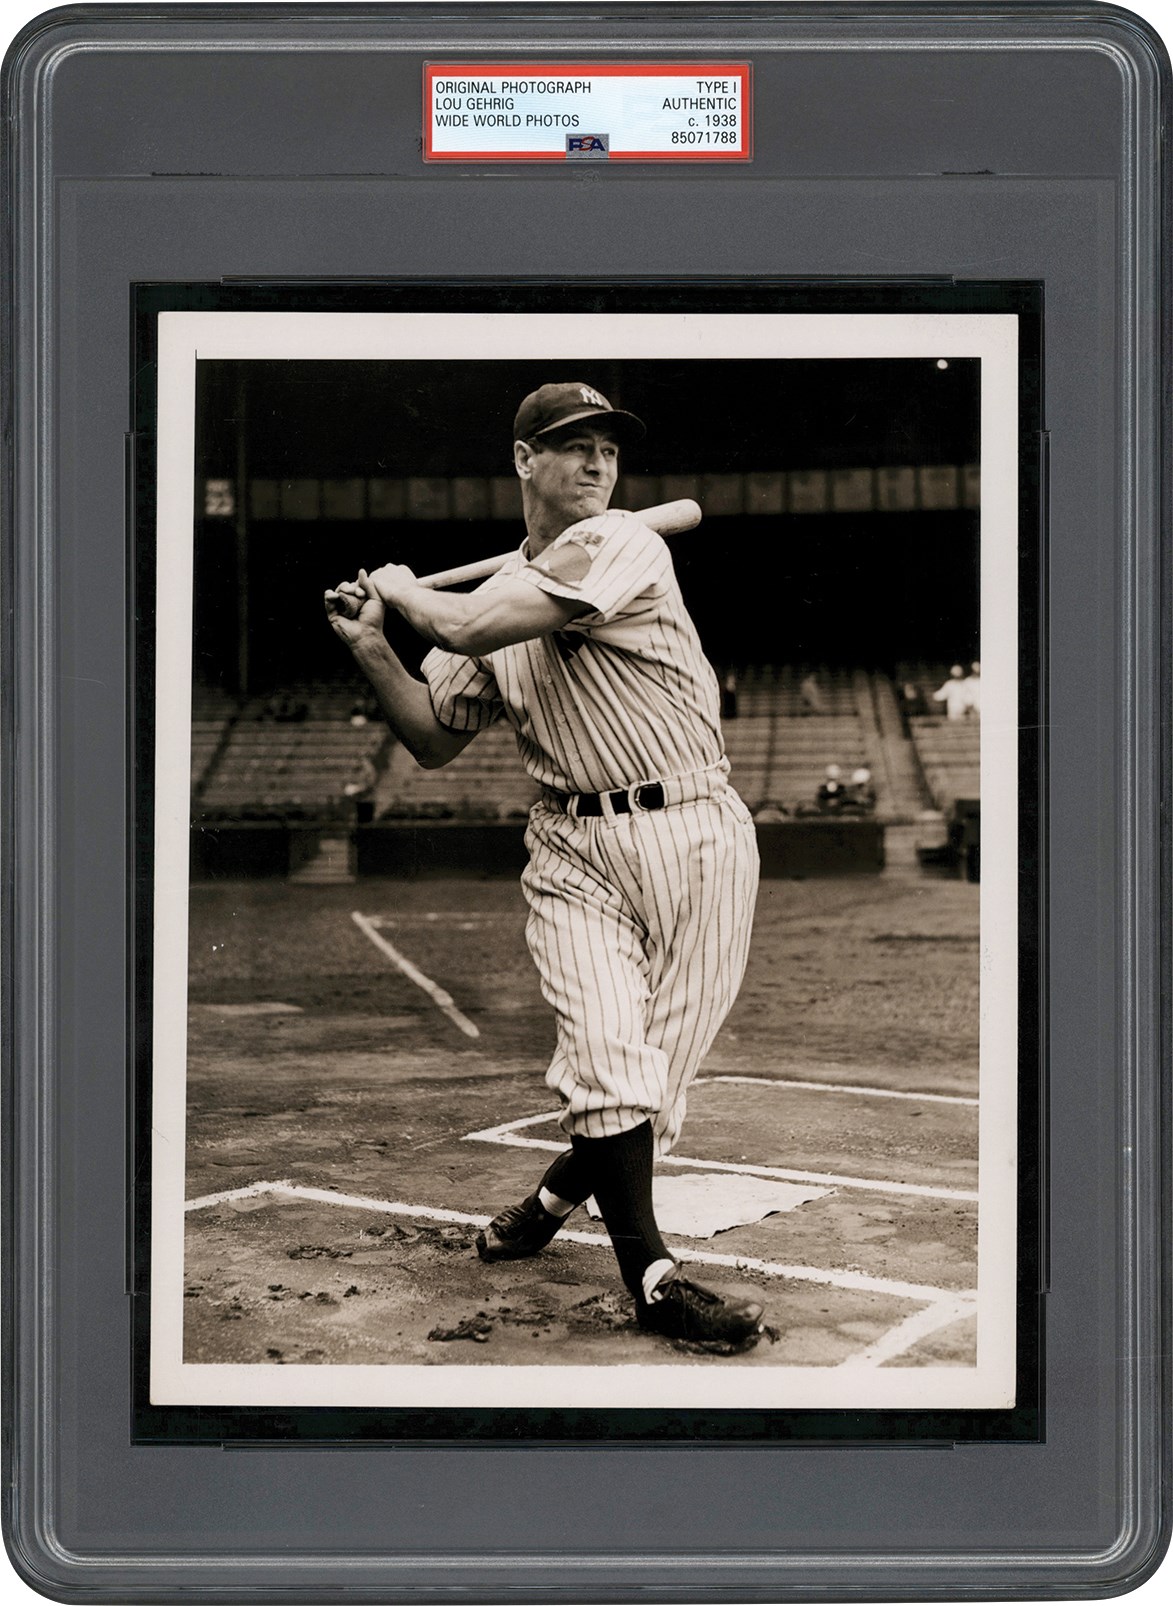 Vintage Sports Photographs - 1938 Lou Gehrig Original Photograph Used for 1949 The Pride of the Yankees Comic Book Cover (PSA Type I)